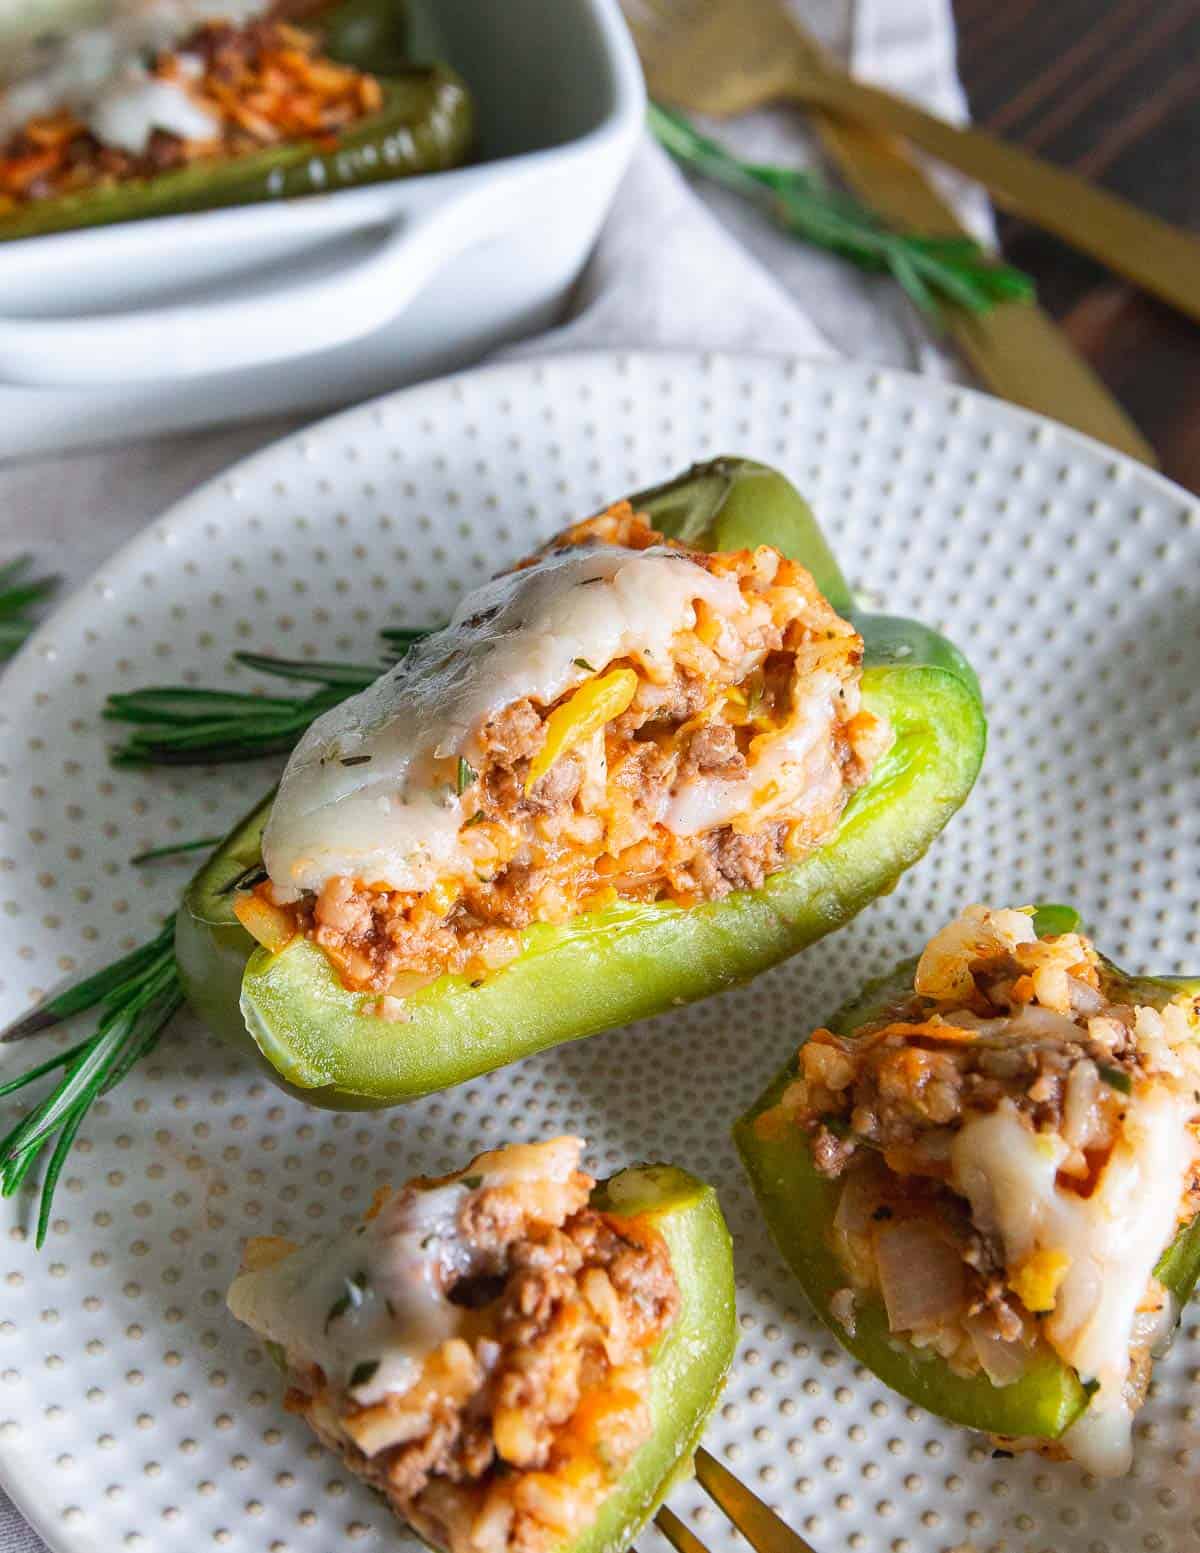 Easy bison stuffed peppers are a hearty and nutritious dinner.